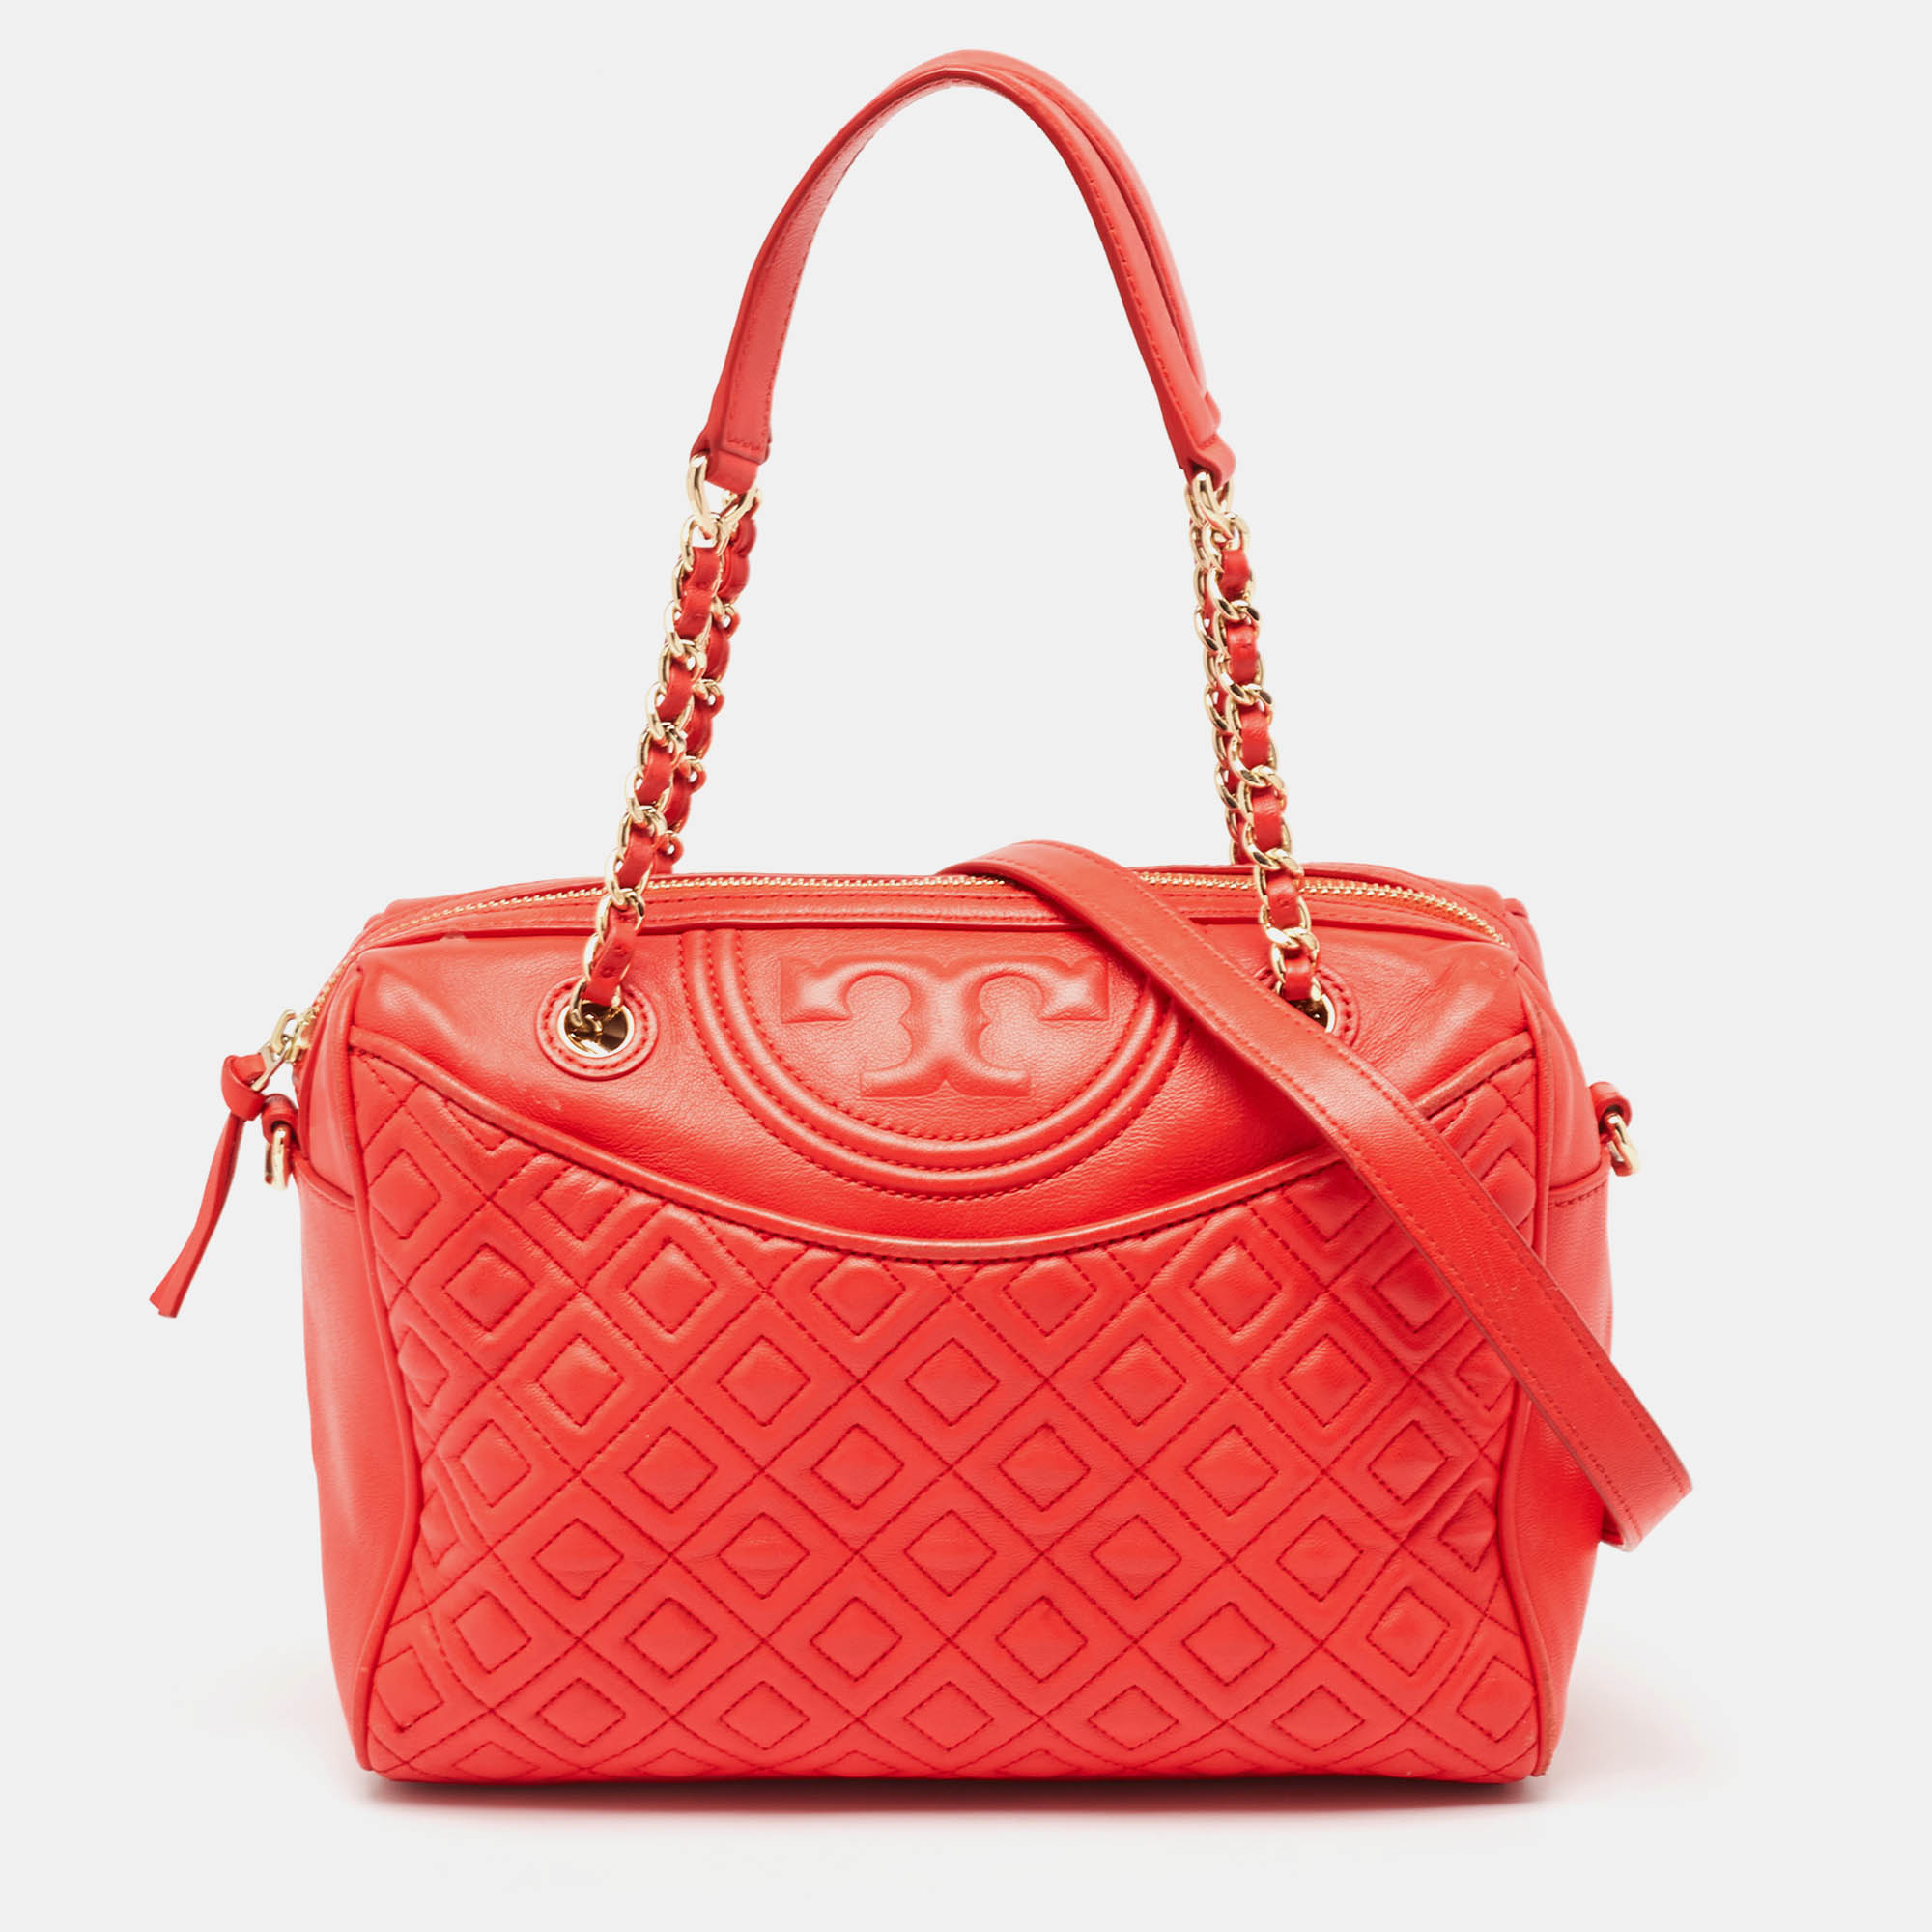 Tory burch red quilted leather fleming duffel bag